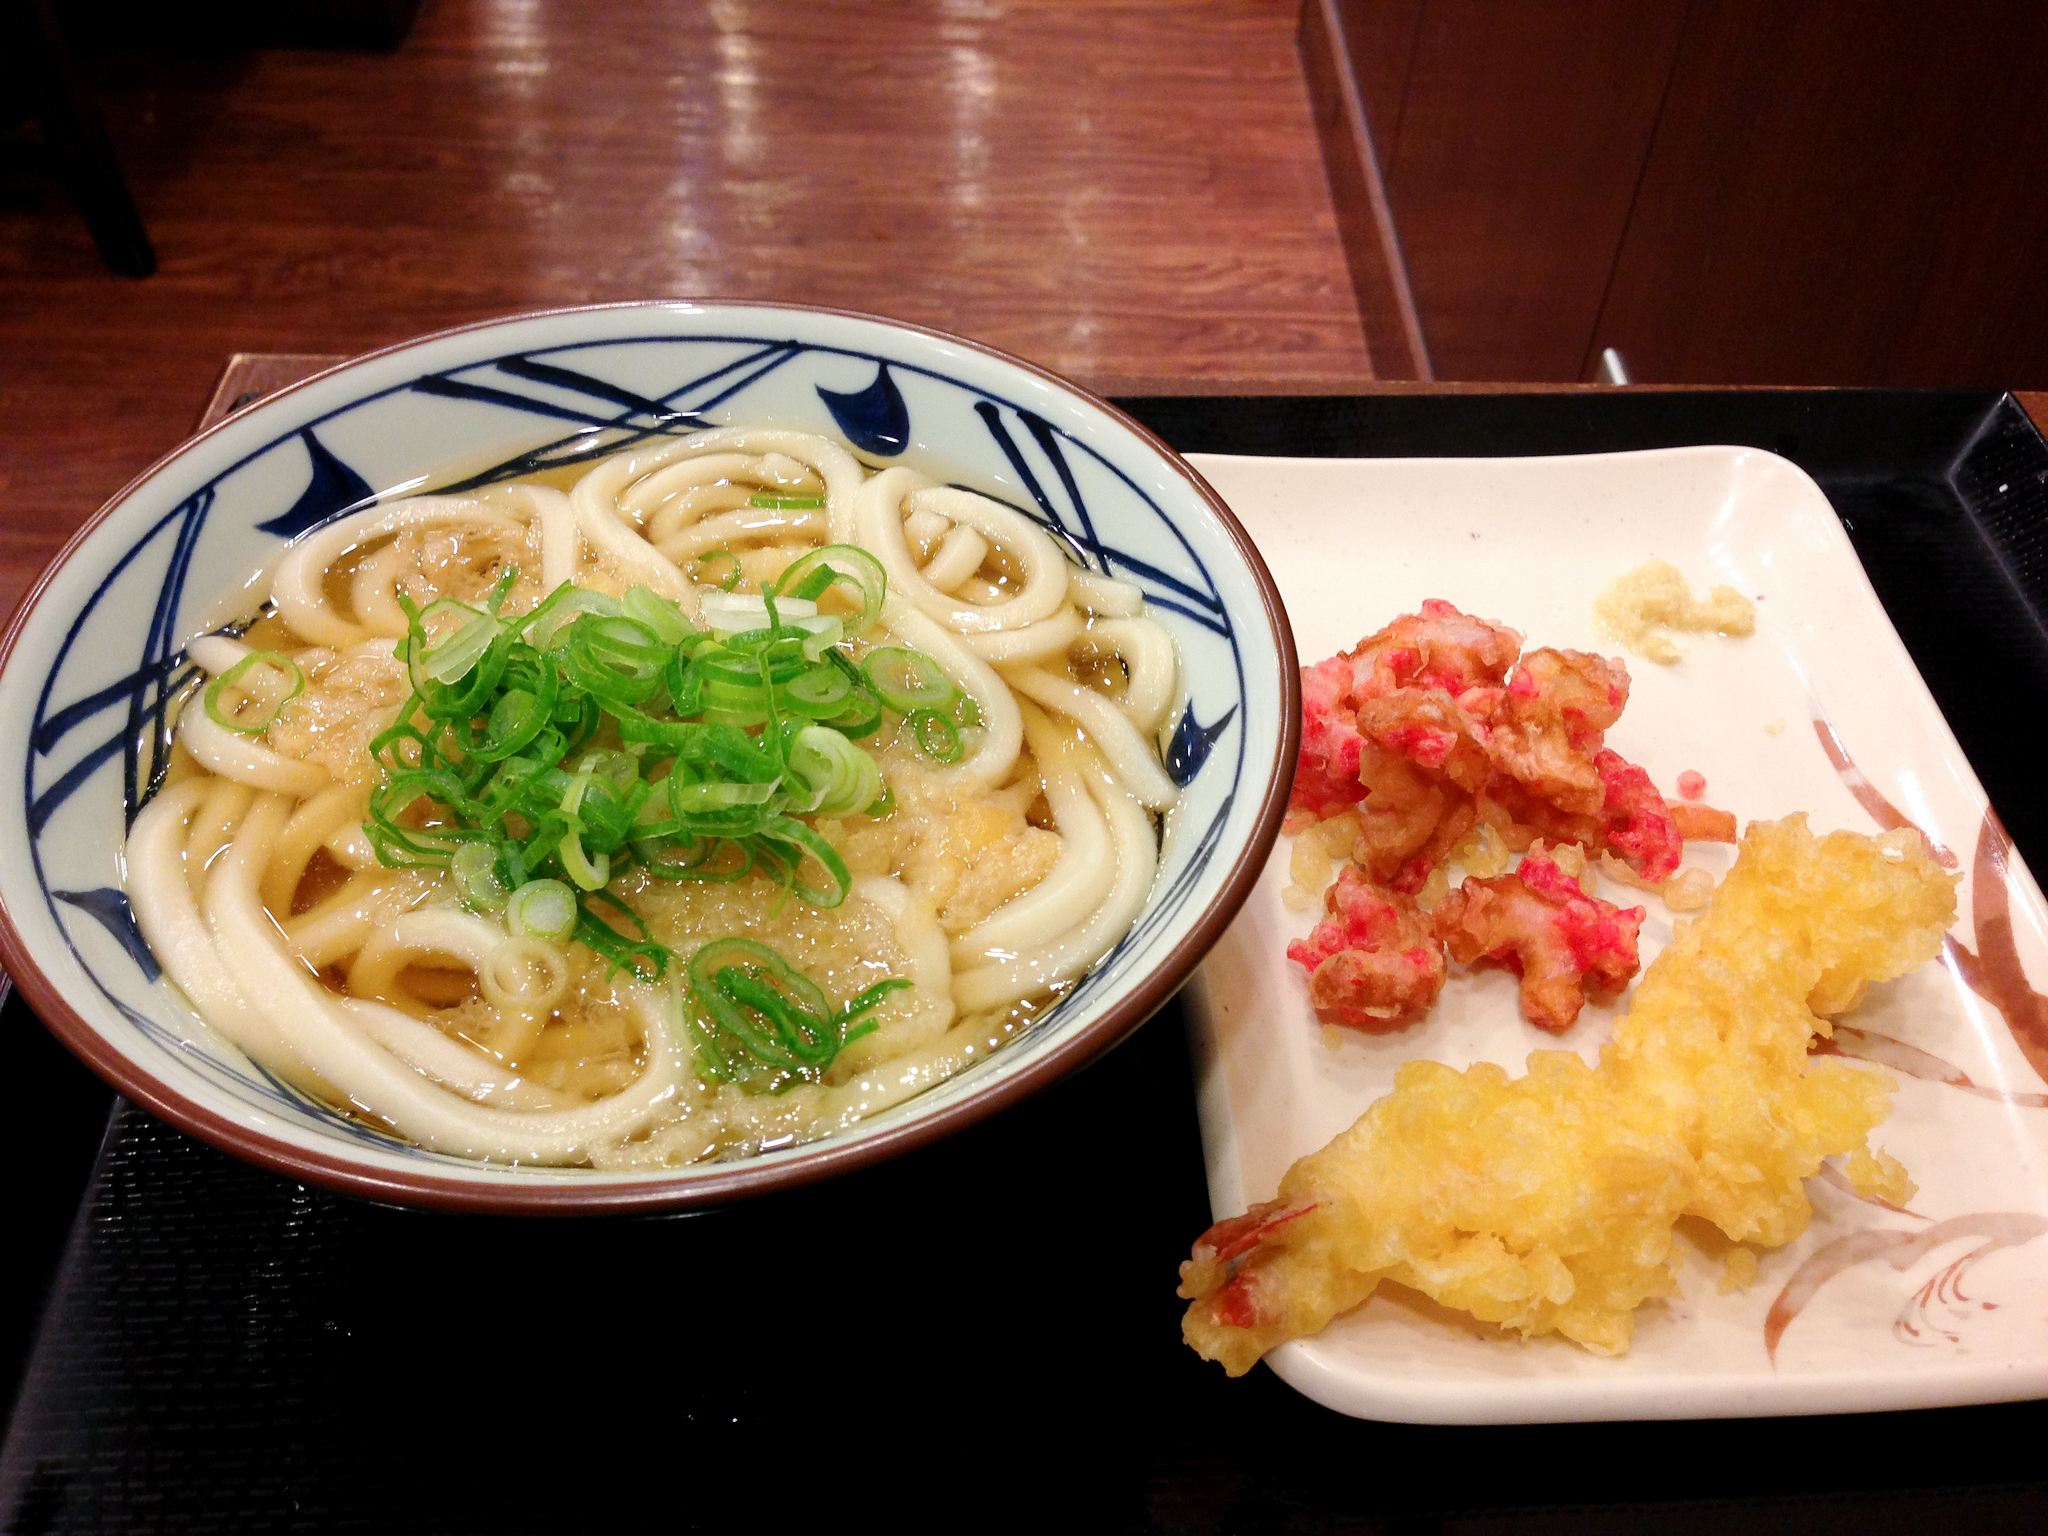 Udon bowl at Muginbo in Tokyo. Photo by alphacityguides.